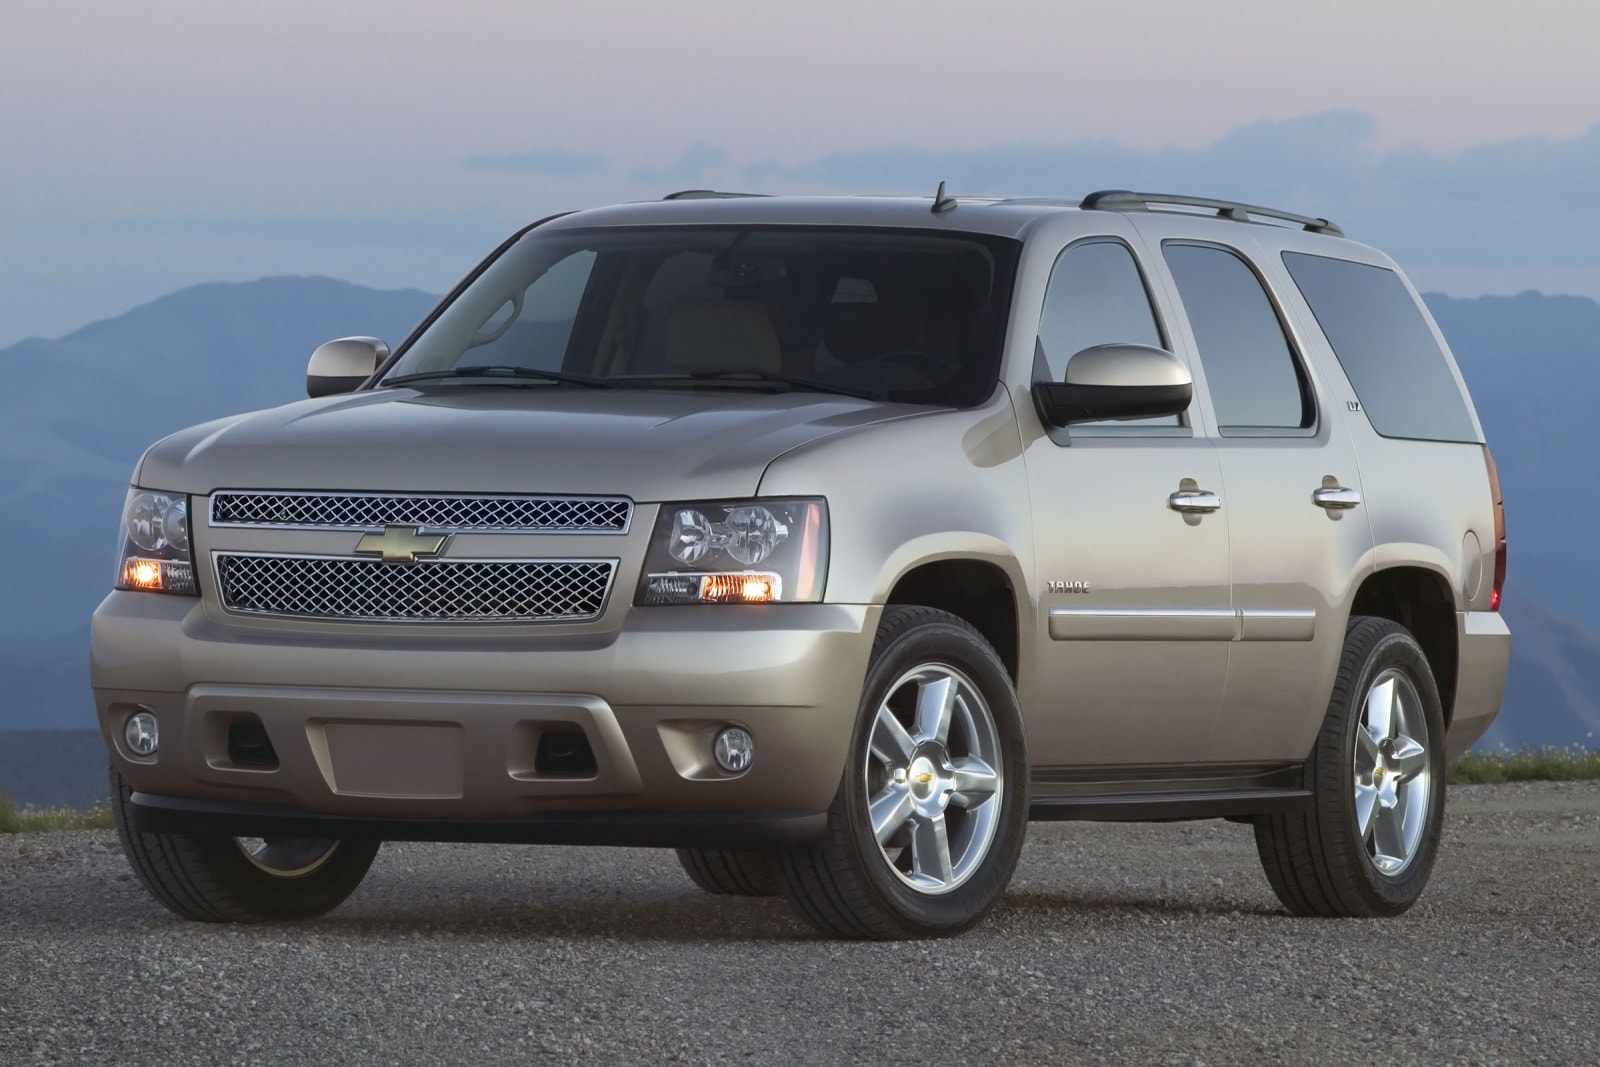 2013 Chevy Tahoe Review & Ratings | Edmunds